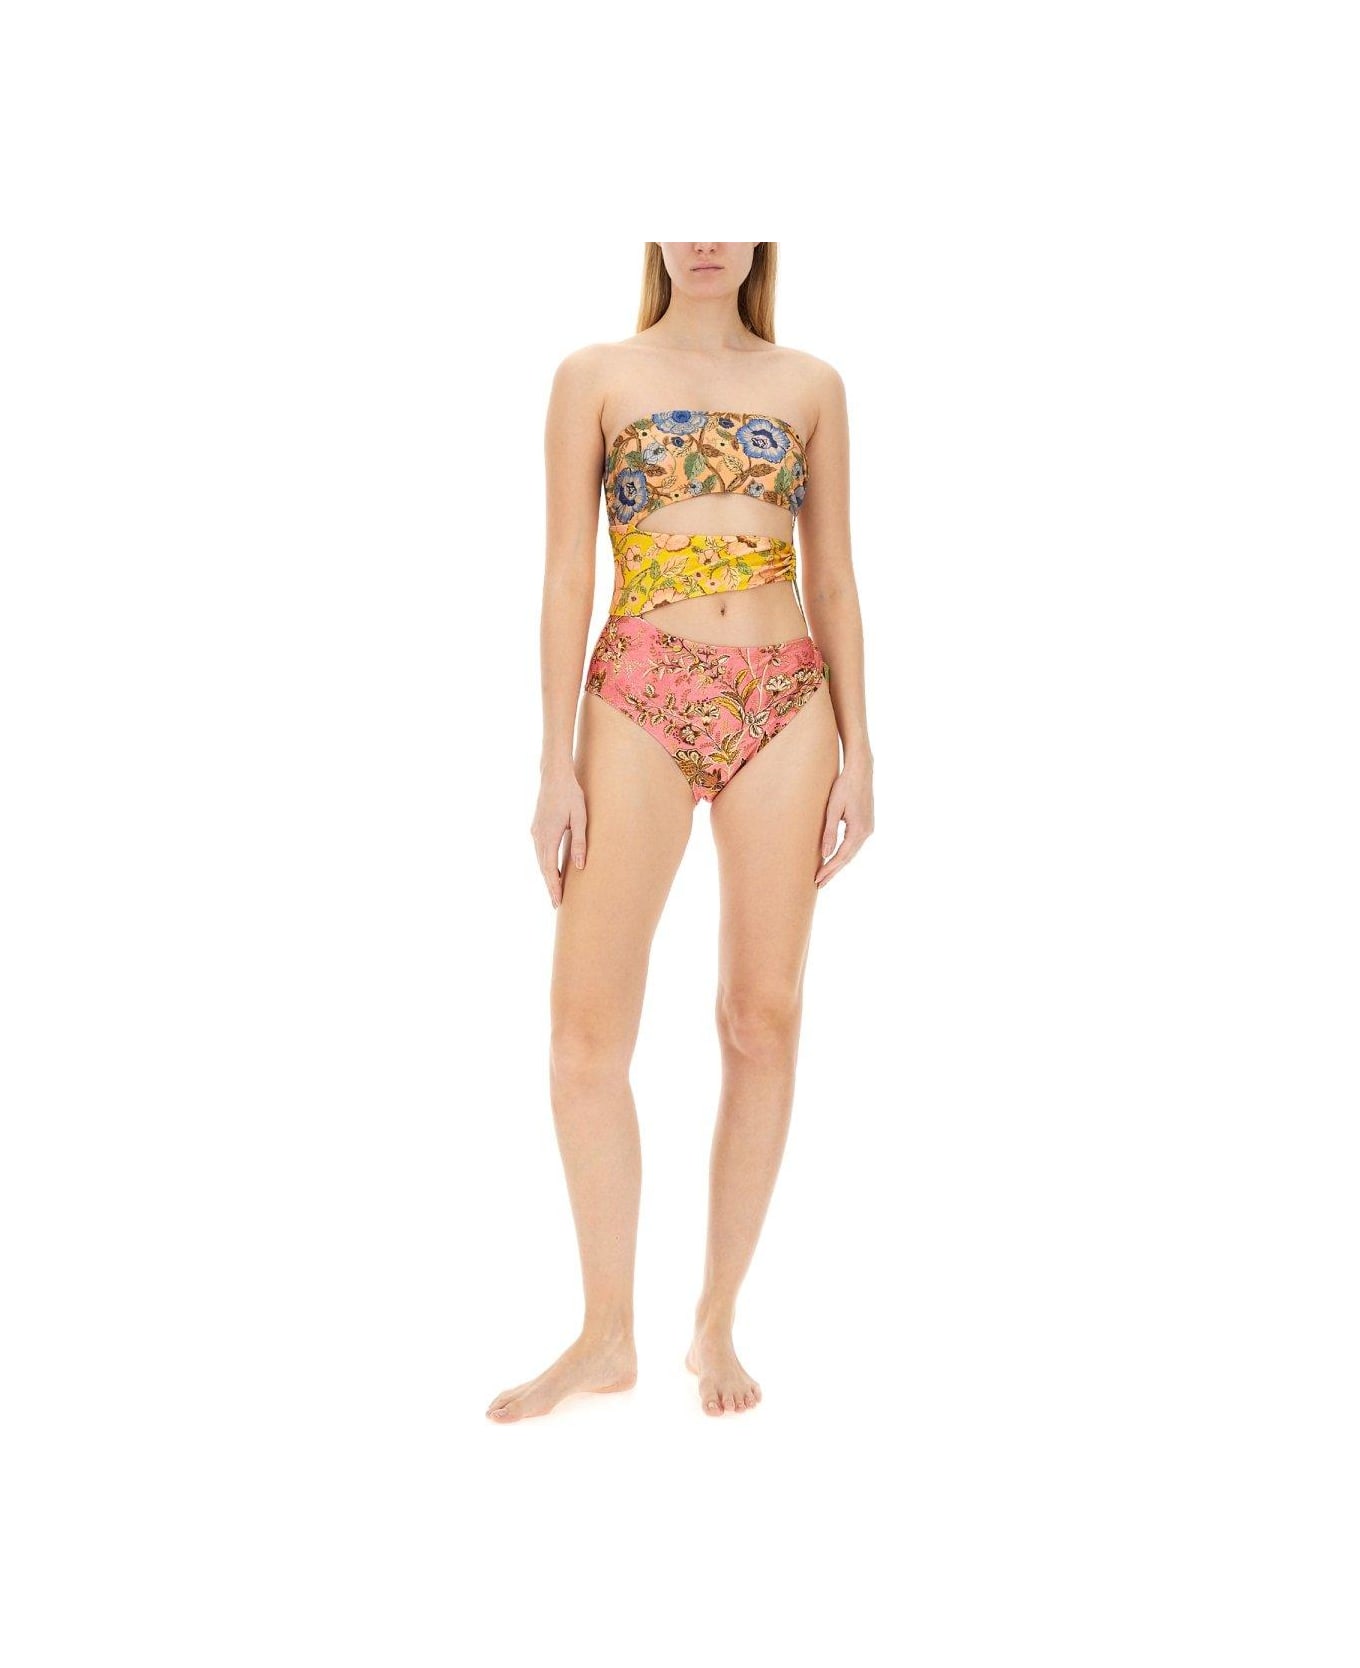 Zimmermann Floral Printed Cut-out One-piece Swimsuit - Spli Spiced